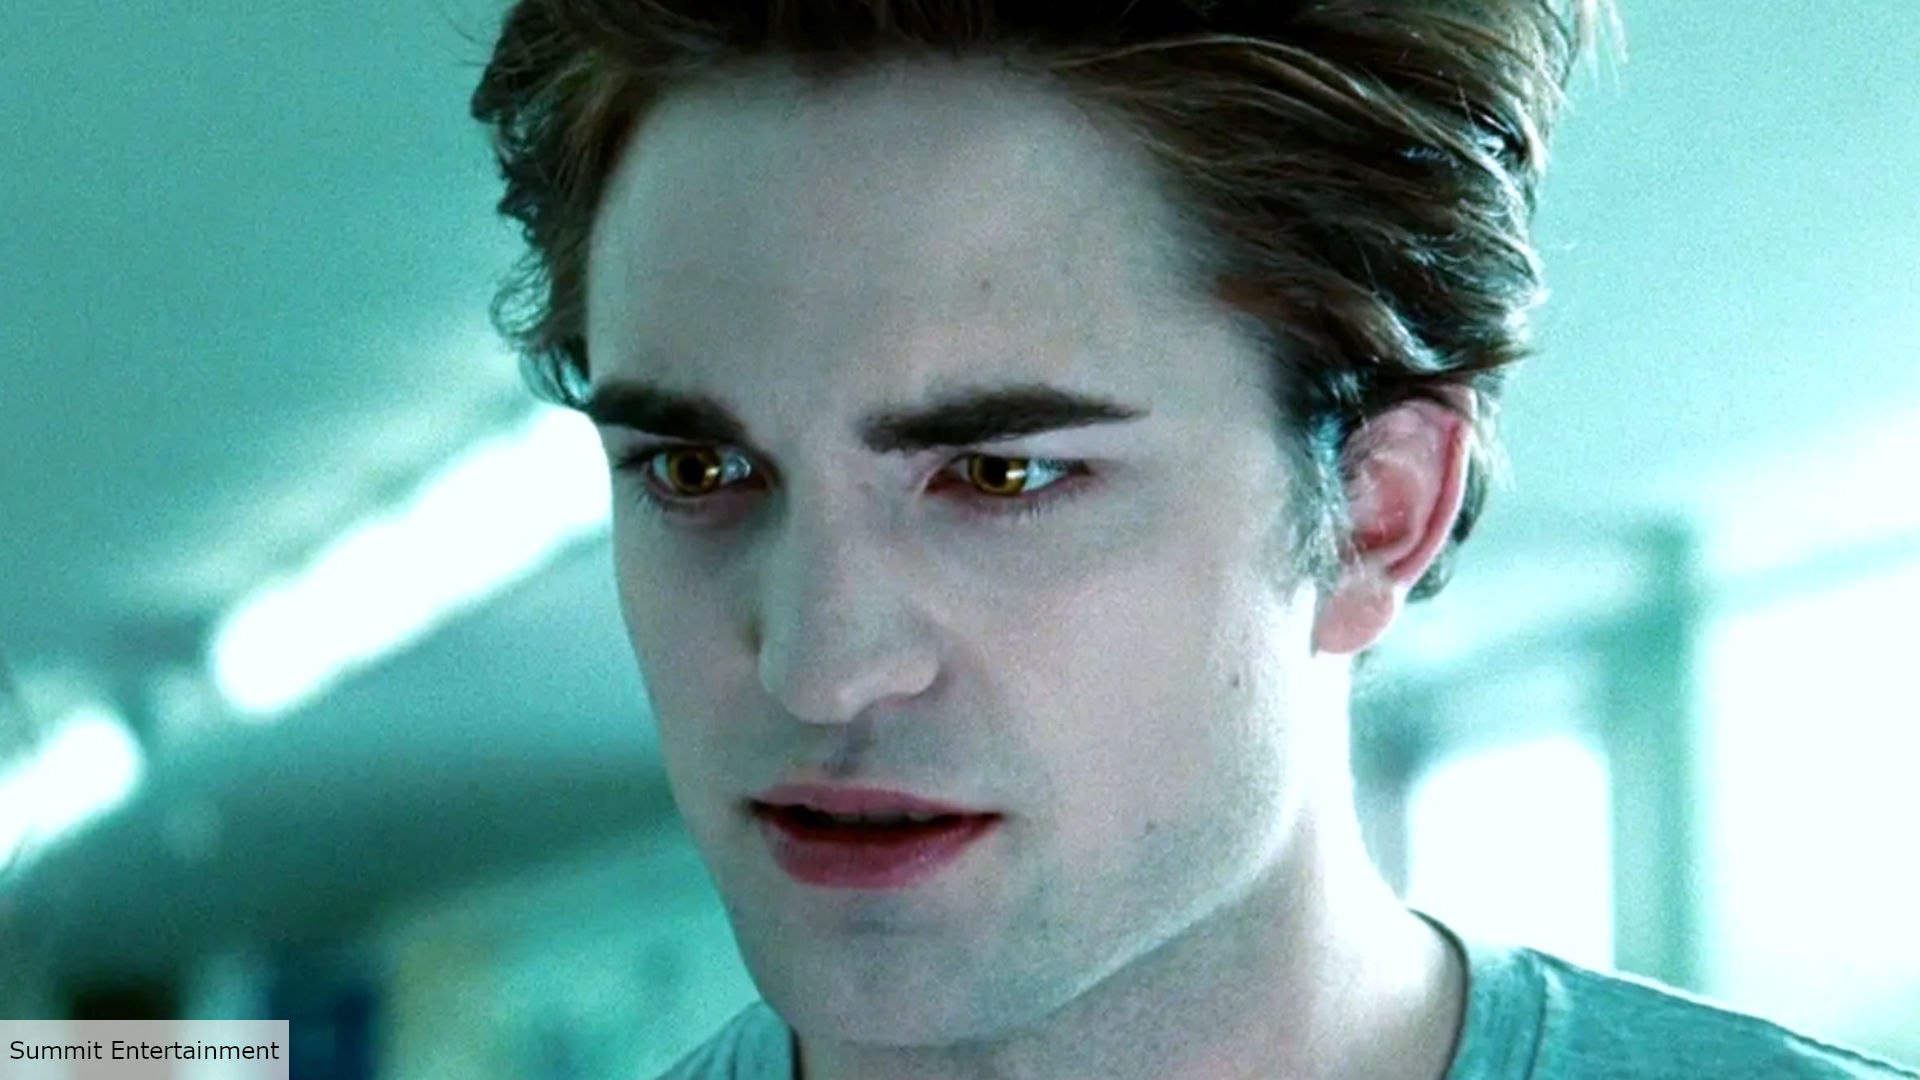 Robert Pattinson is more than just the Twilight guy | The Digital Fix